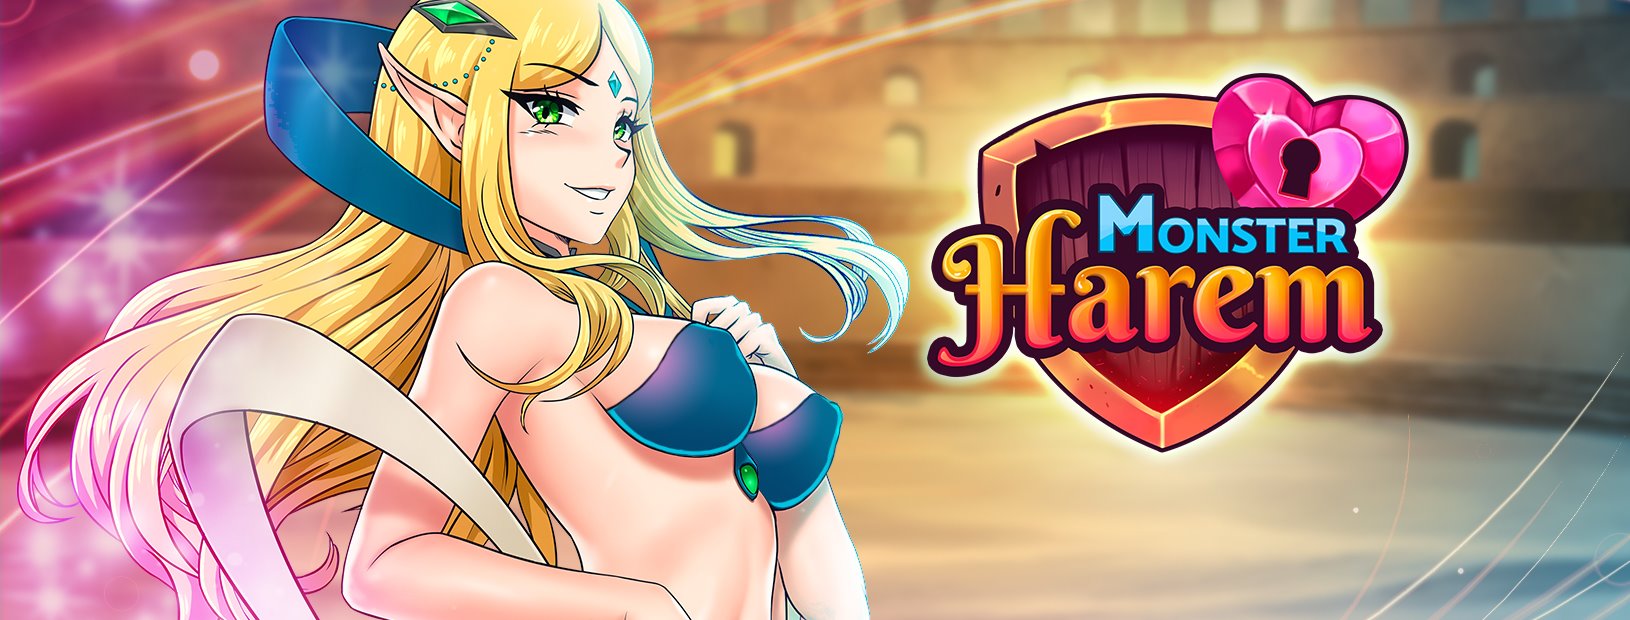 Hentai Mobile Game Review: Monster Harem - Hentaireviews